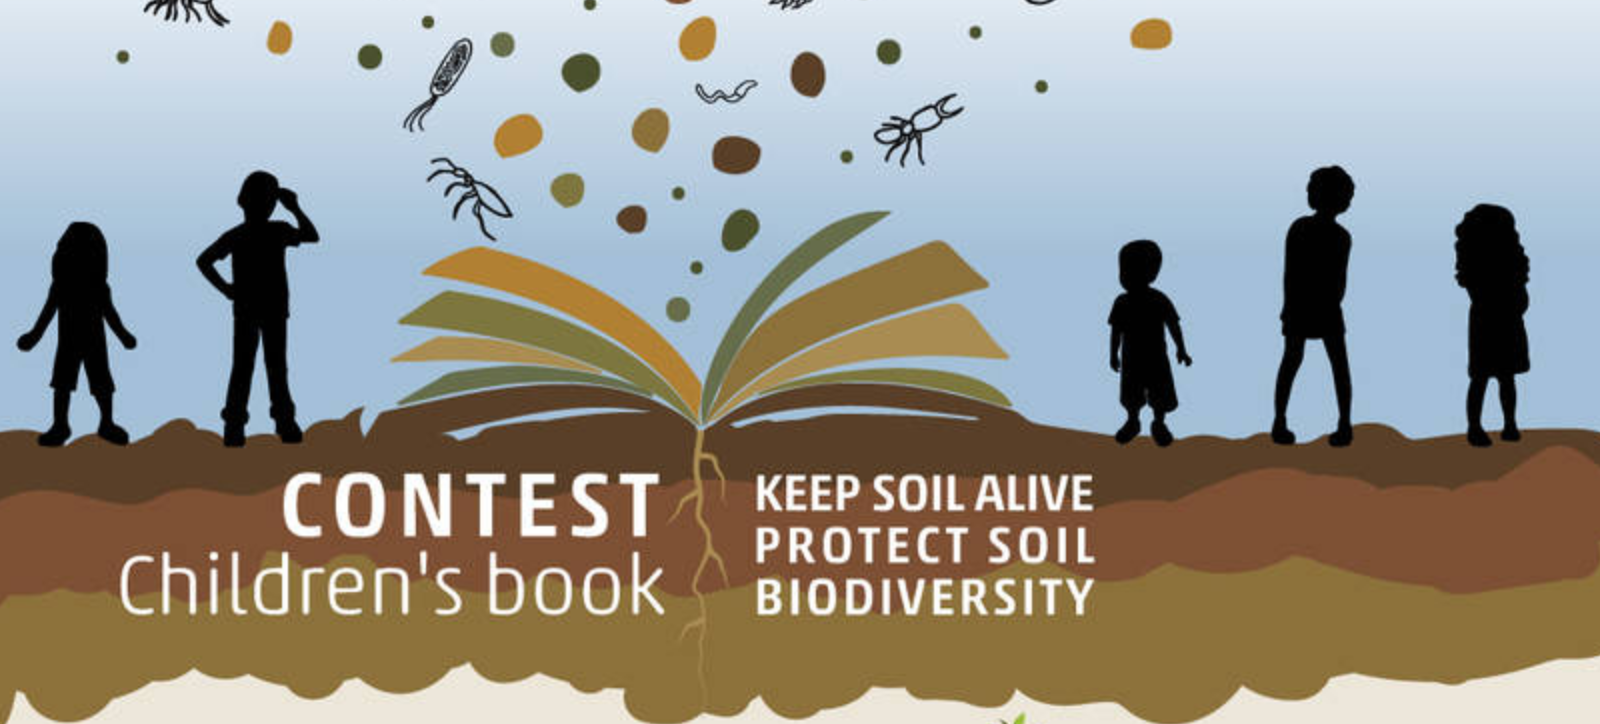 The collection of books written by the winners of the scientific children's book contest on Soil Biodiversity.